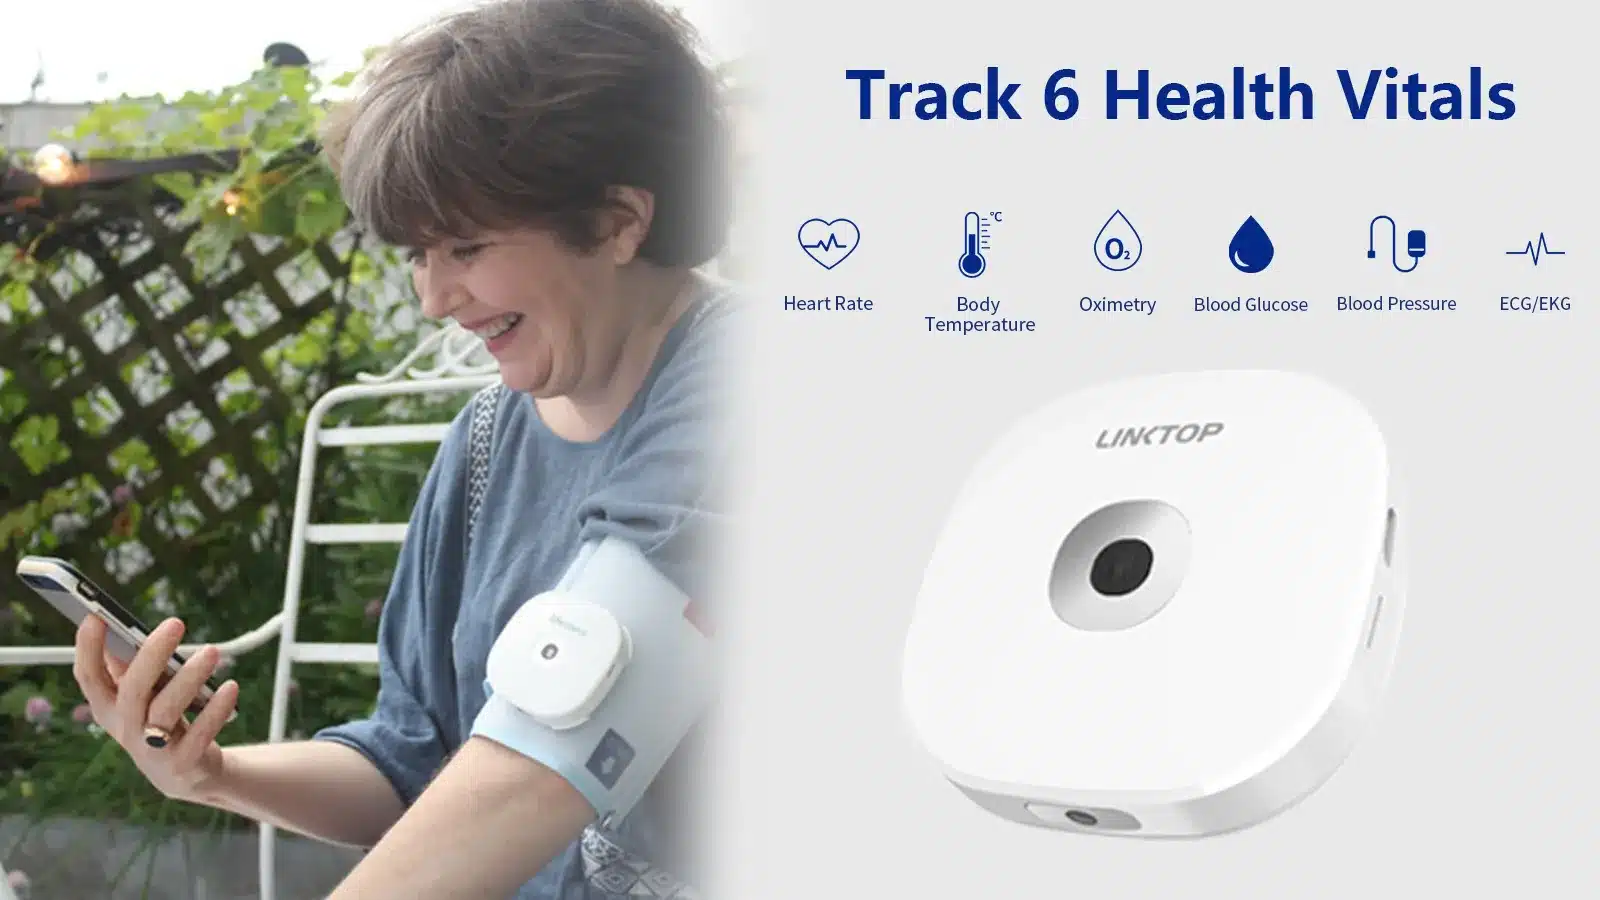 Linktop 6-in-1 Remote Health Monitoring system